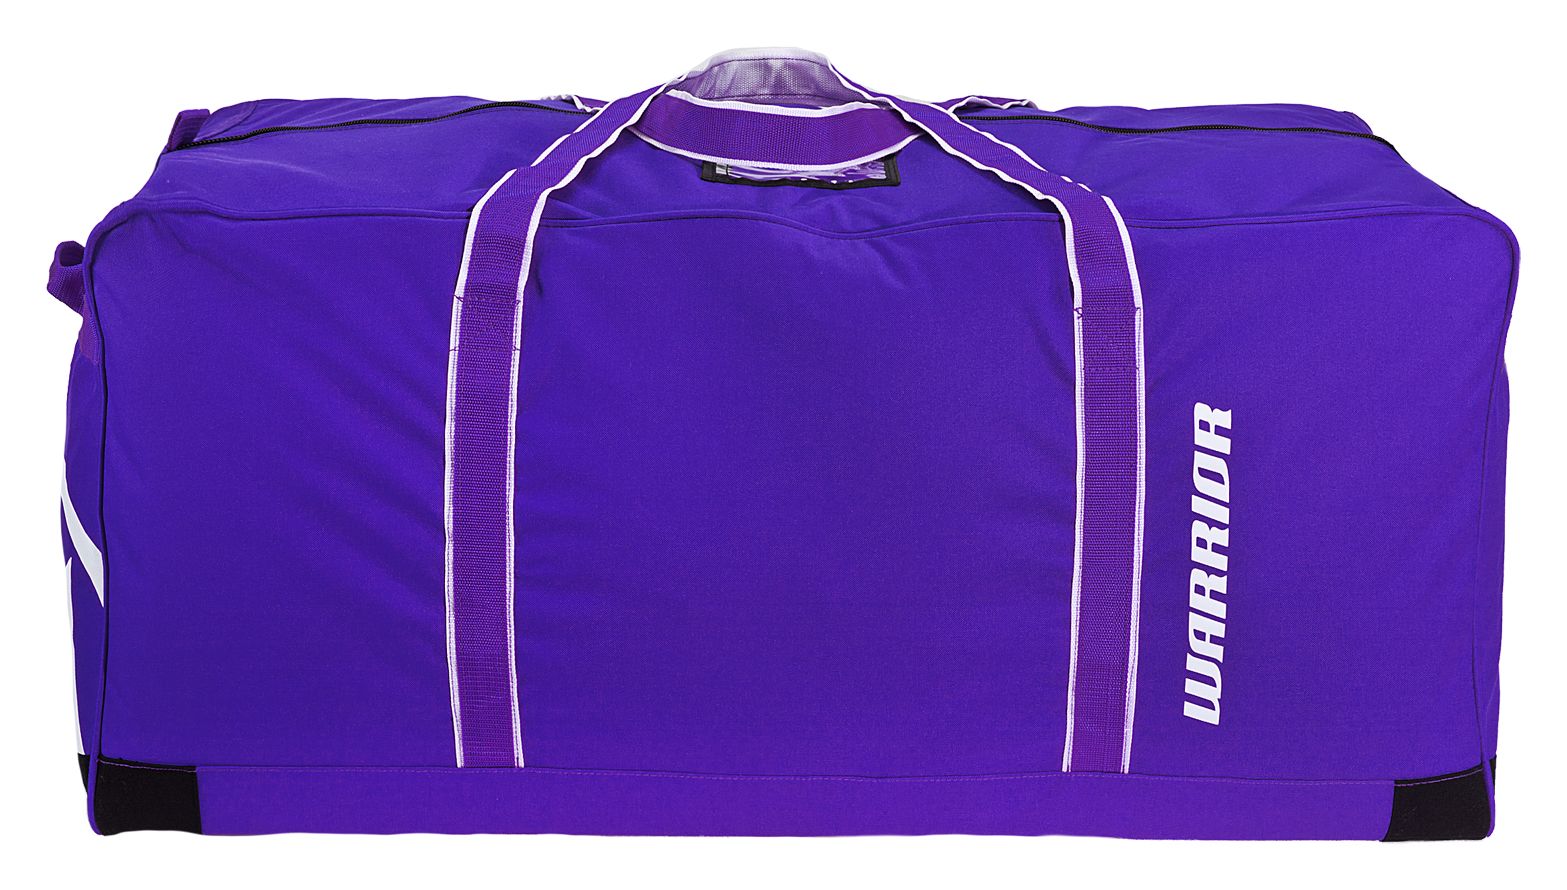 Team Goalie Duffel Bag, Purple with White image number 0